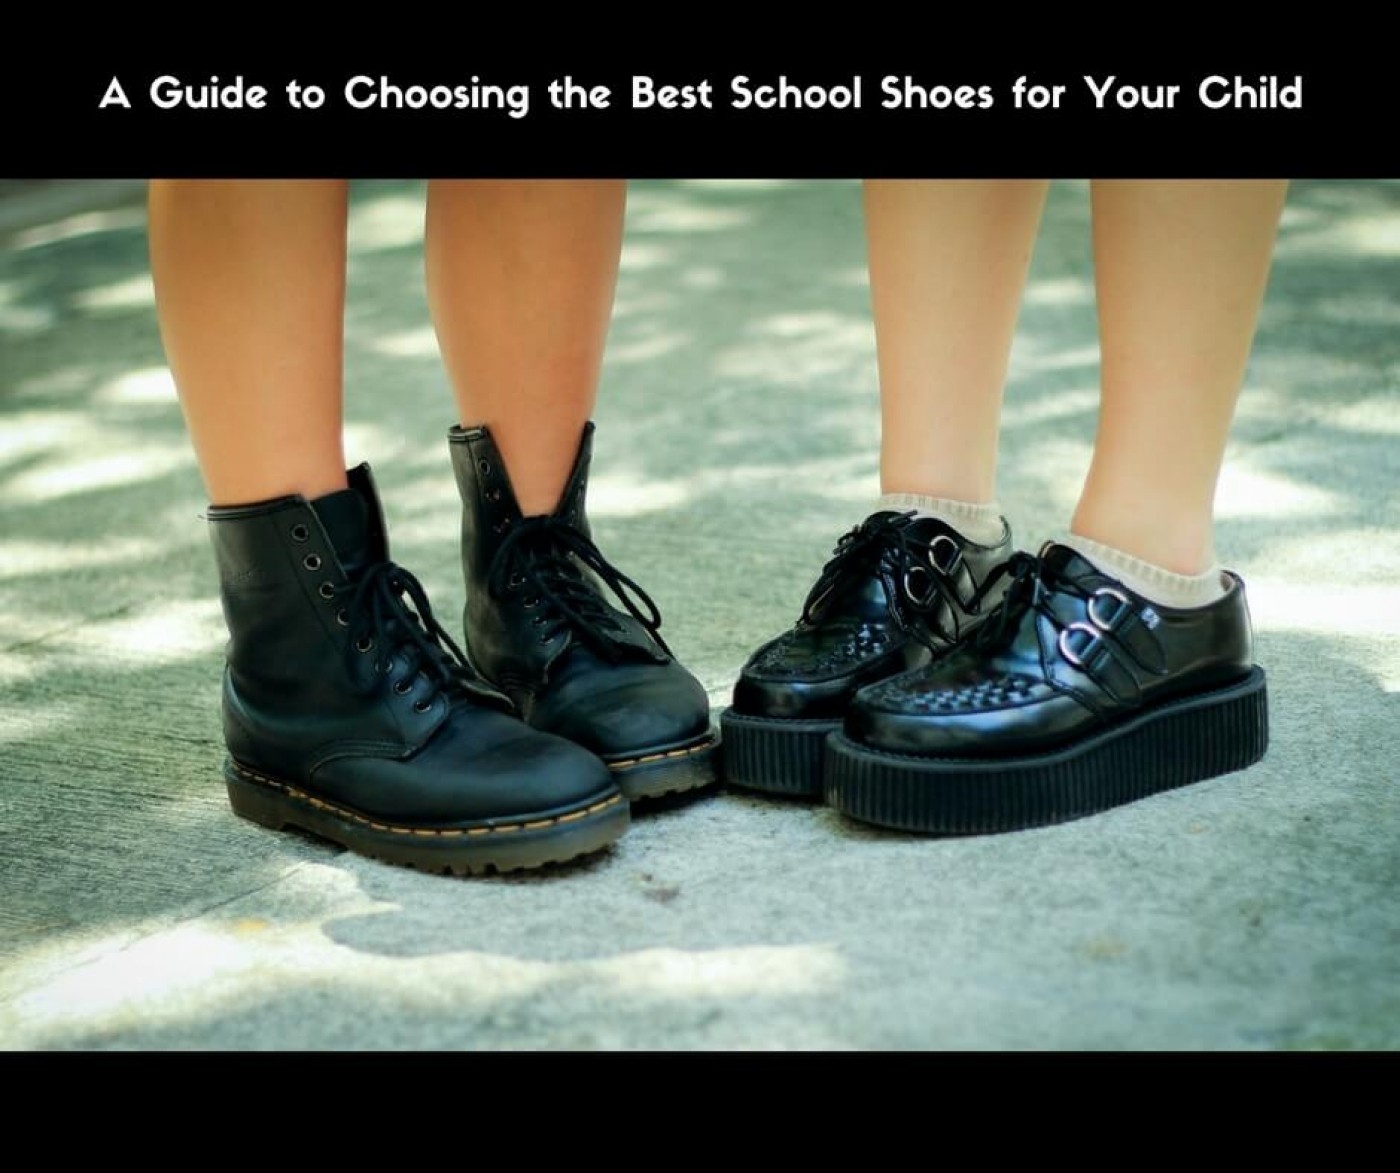 Is your child wearing suitable footwear to school?